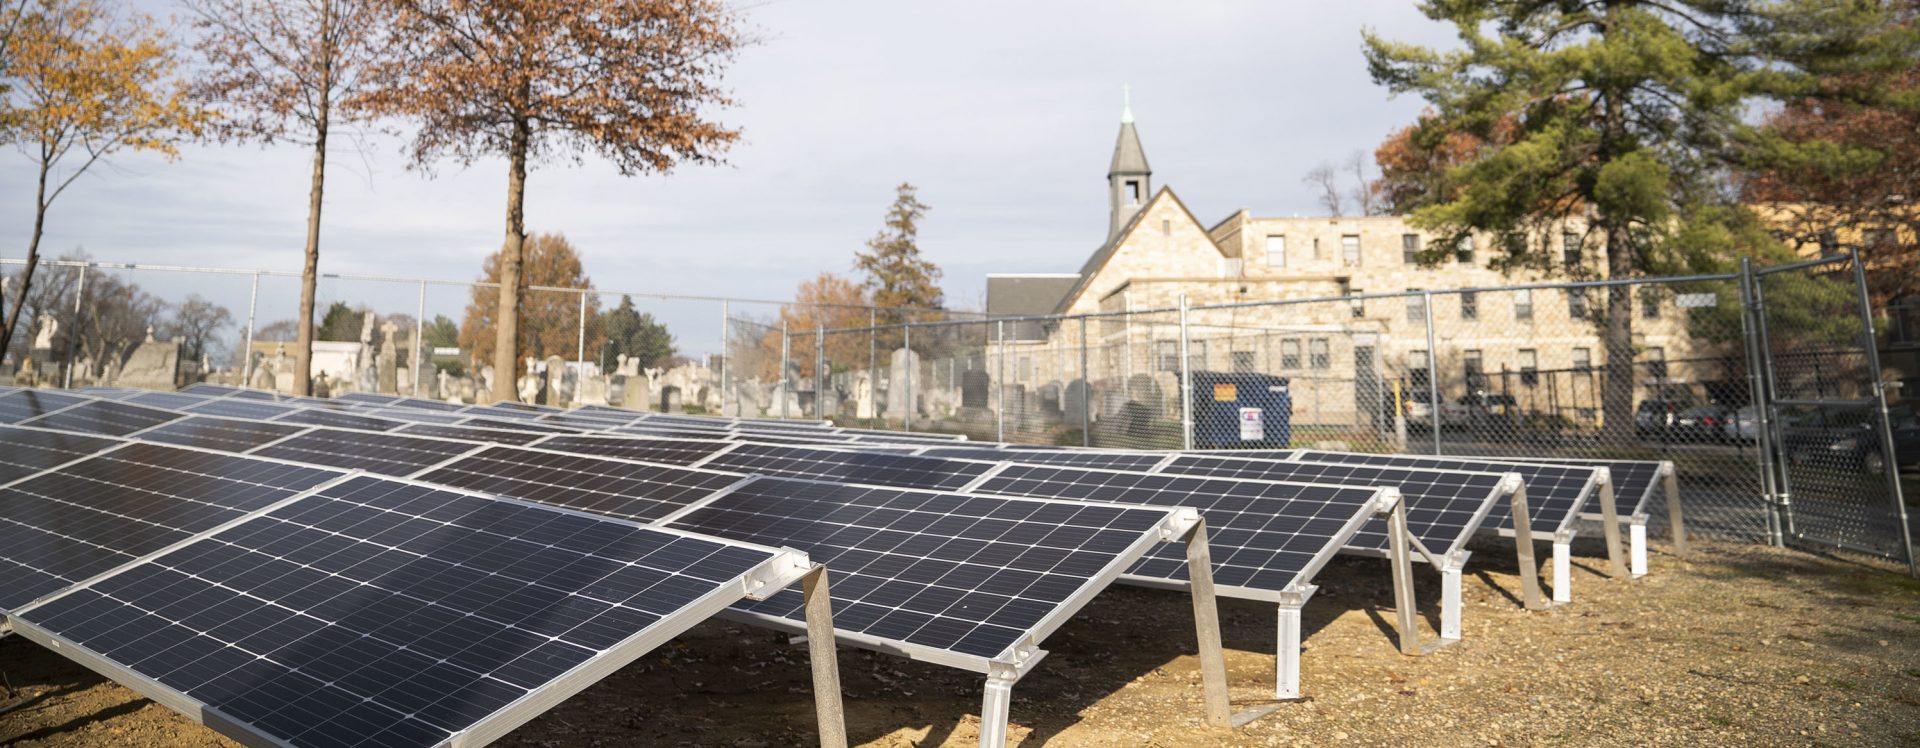 The Monastery of Our Lady of Mt. Carmel in Washington, D.C. is the new host of a 151 kW community solar garden. The panels will provide roughly 50 nearby households with green energy.